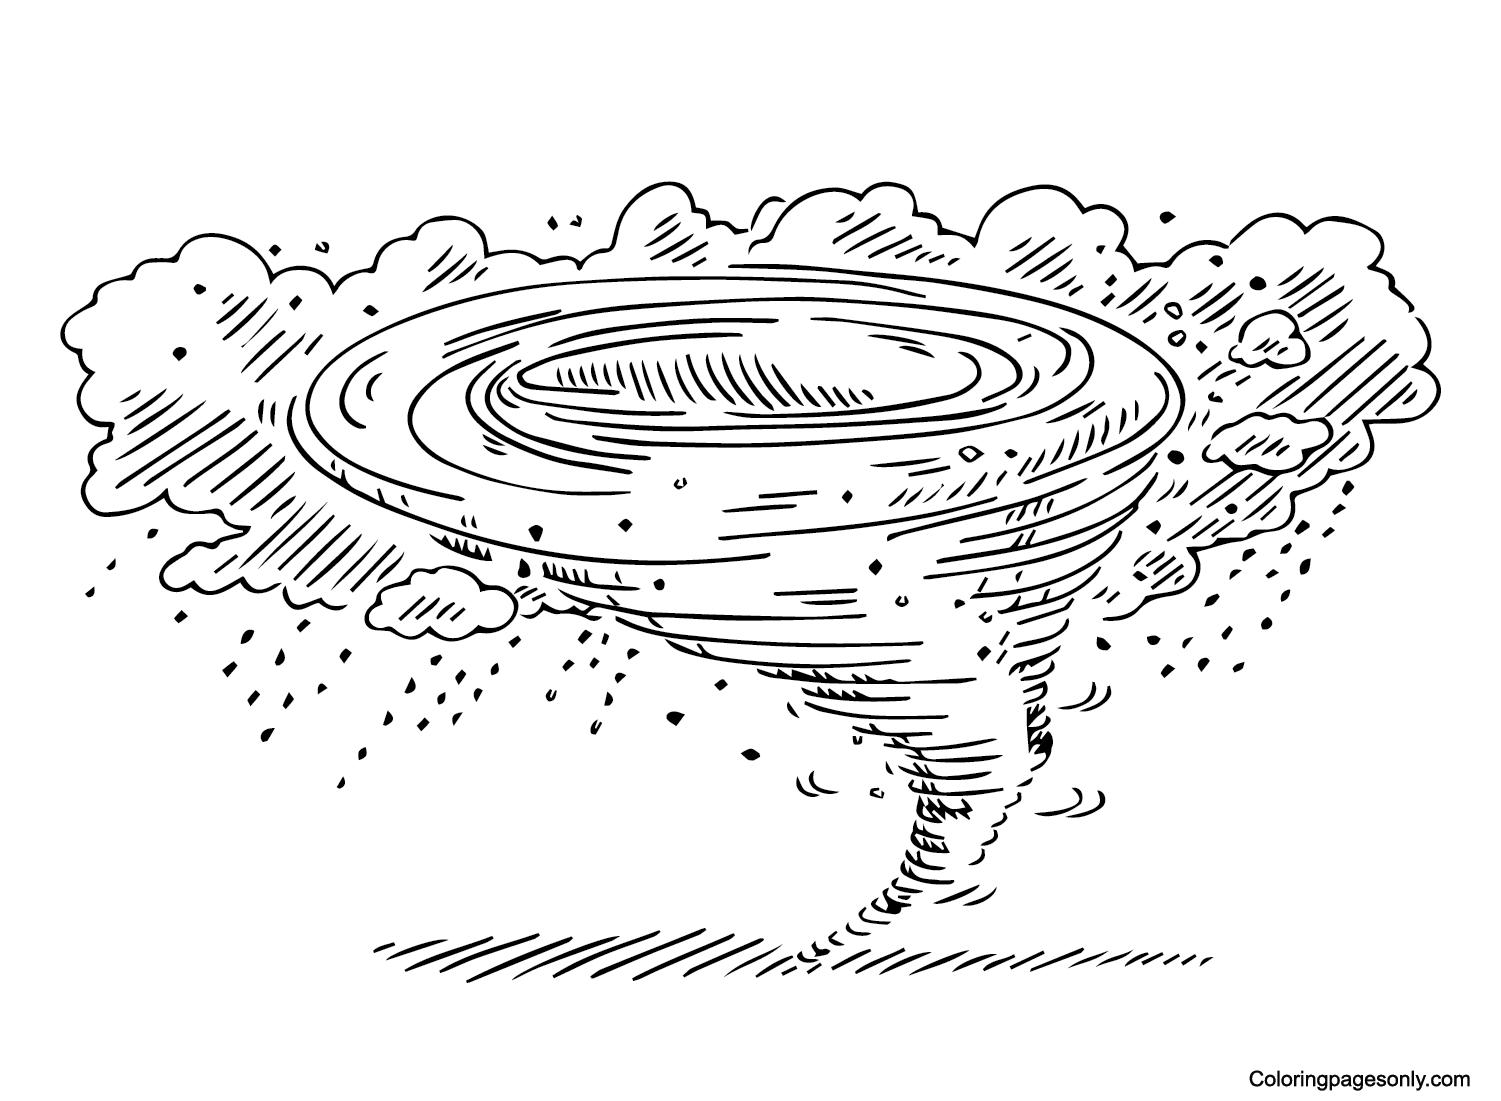 tornado coloring pages